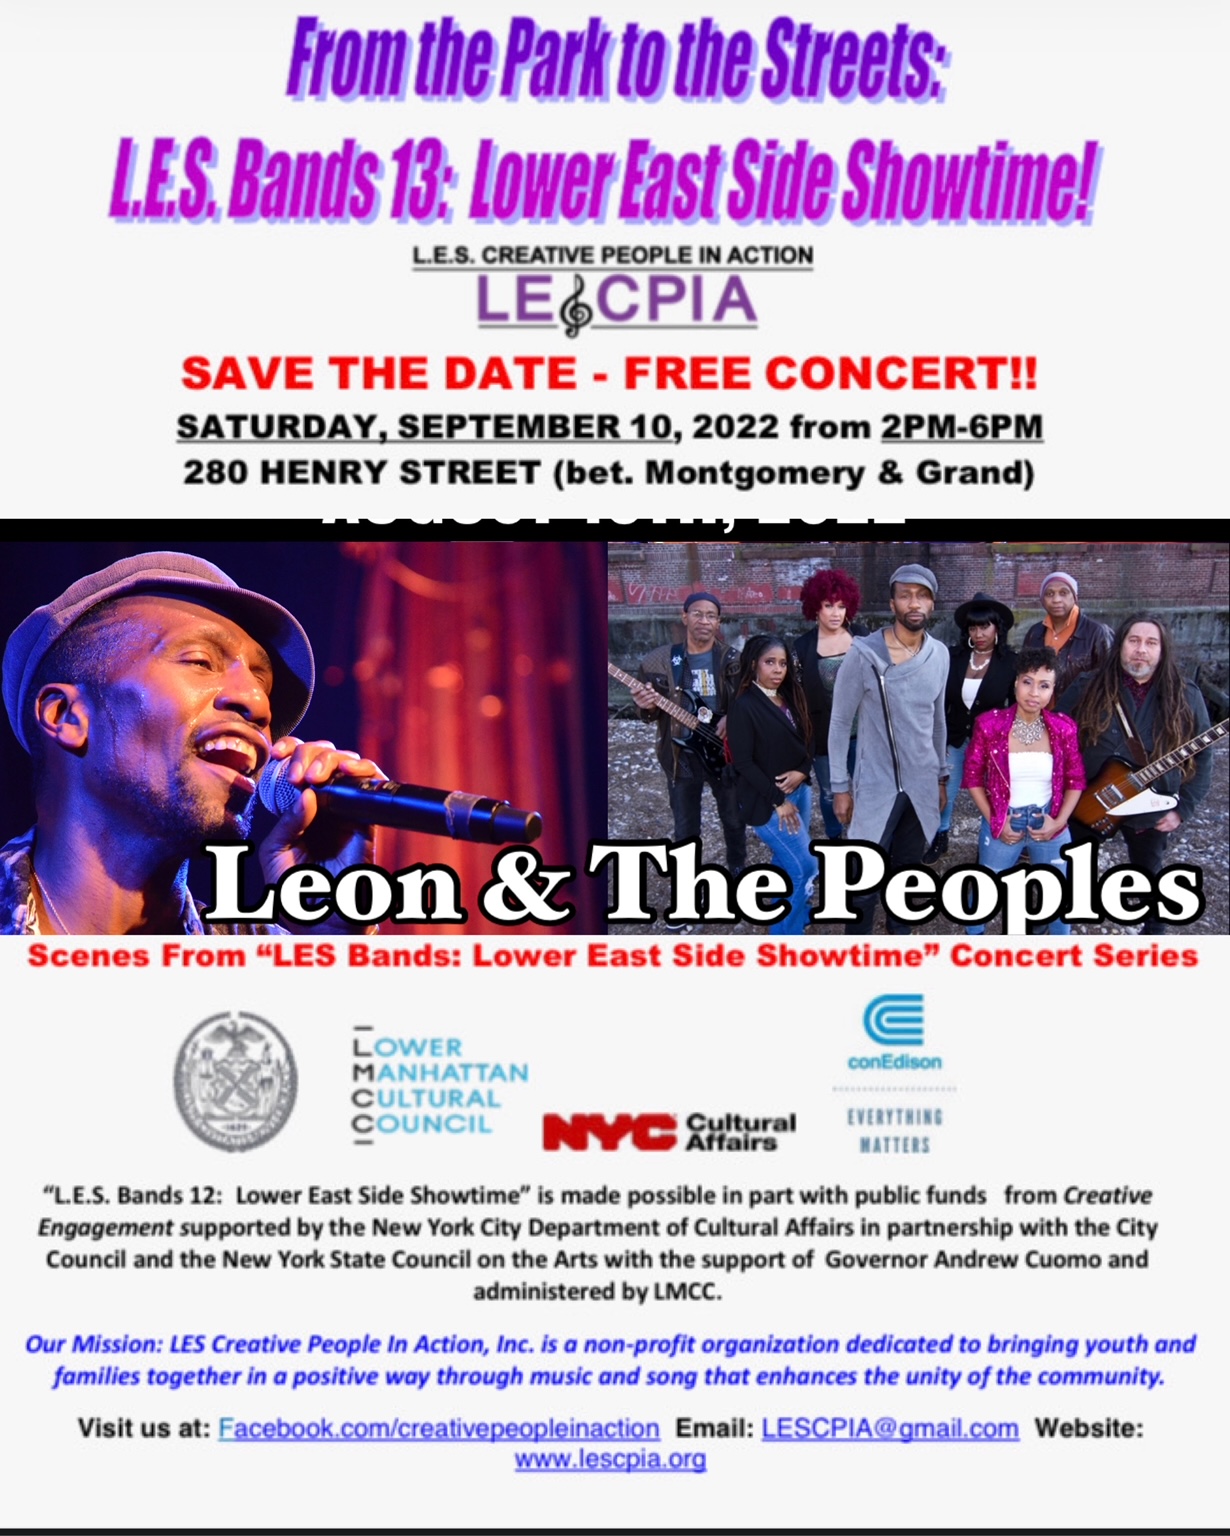 From The Parks To The Streets: L.E.S. Bands 13: Lower East Side Showtime!